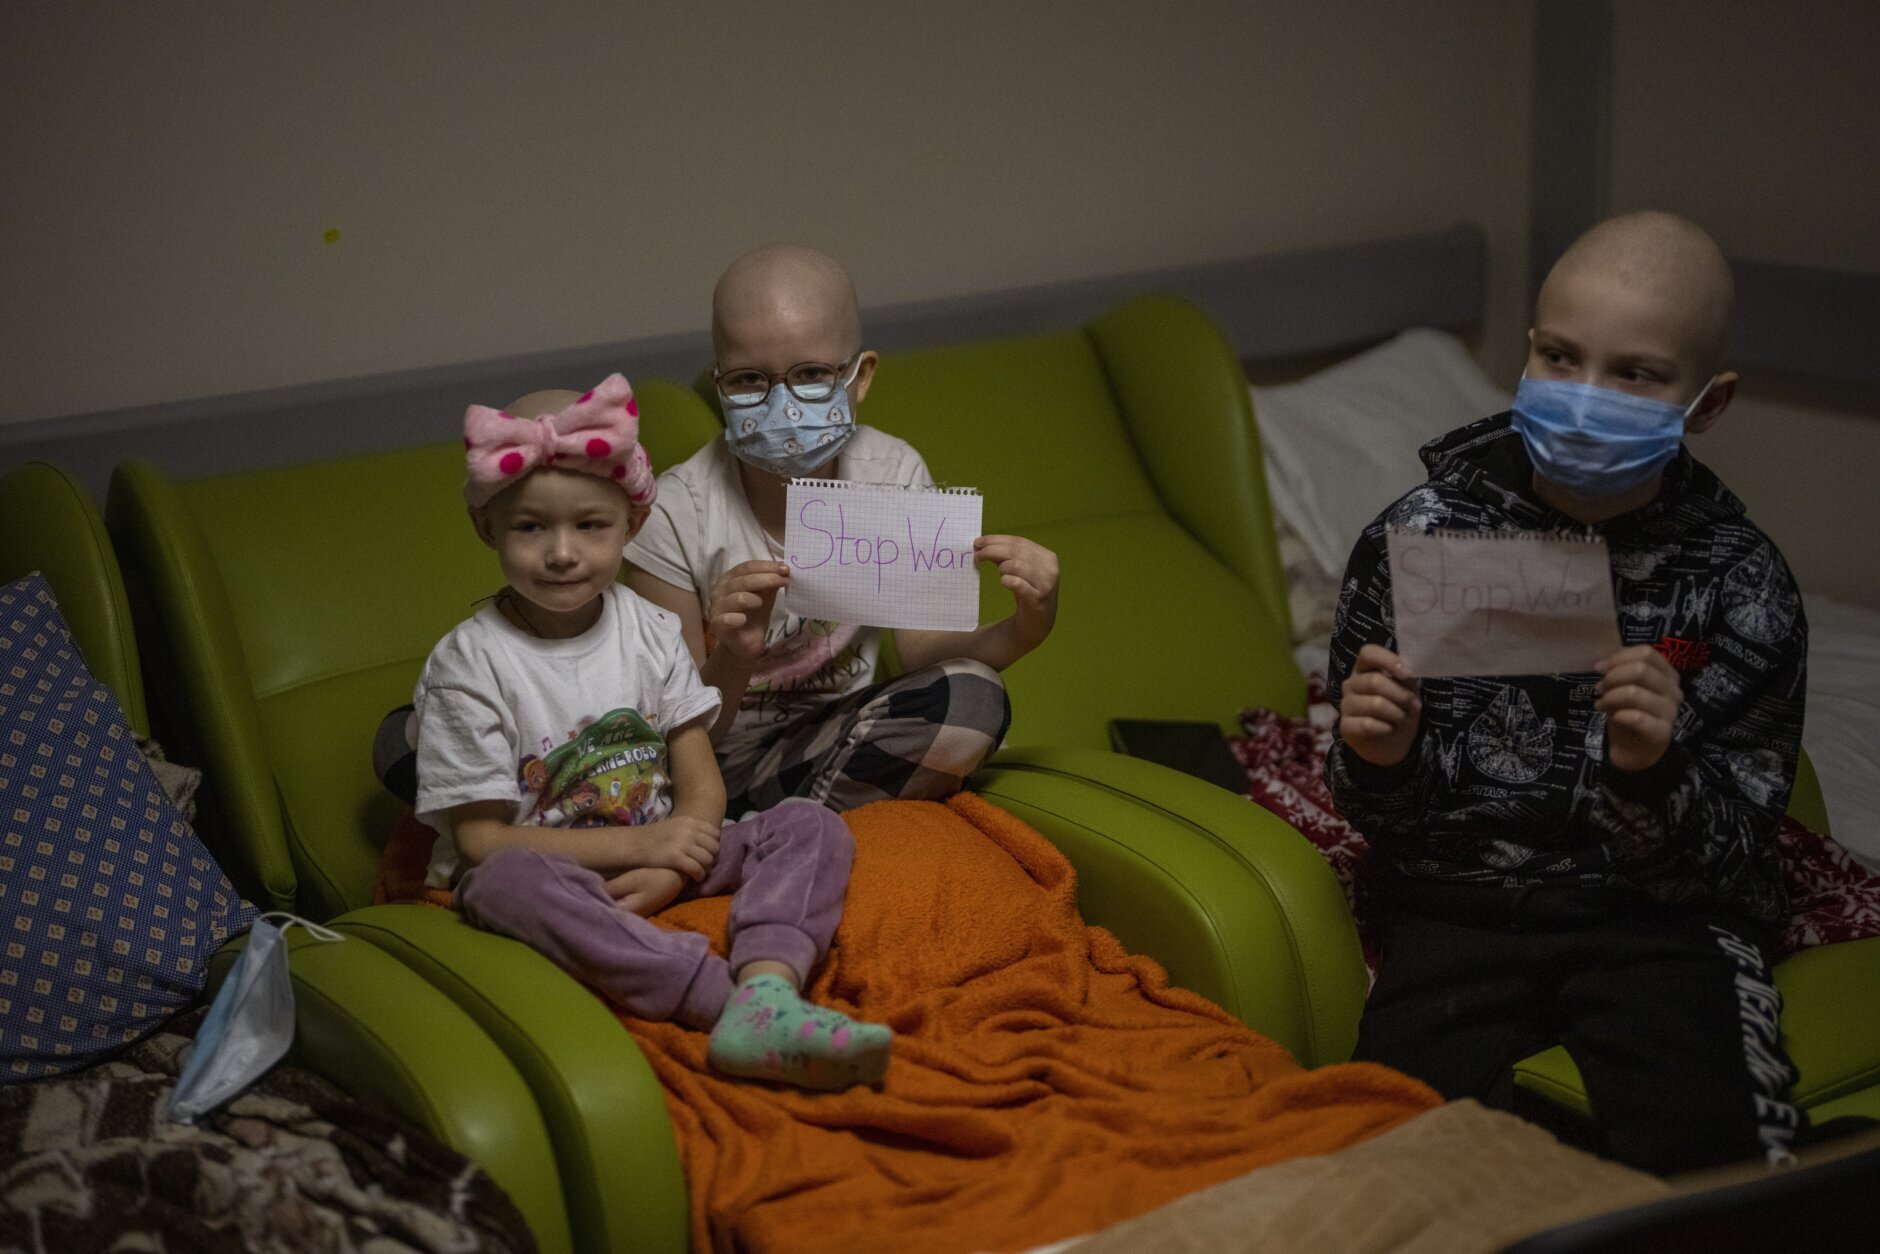 Oncology patients hold up sheets of paper with the words "Stop War" in a basement used as a bomb shelter at the Okhmadet children's hospital in central Kyiv, Ukraine, Monday, Feb. 28, 2022. (AP Photo/Emilio Morenatti)